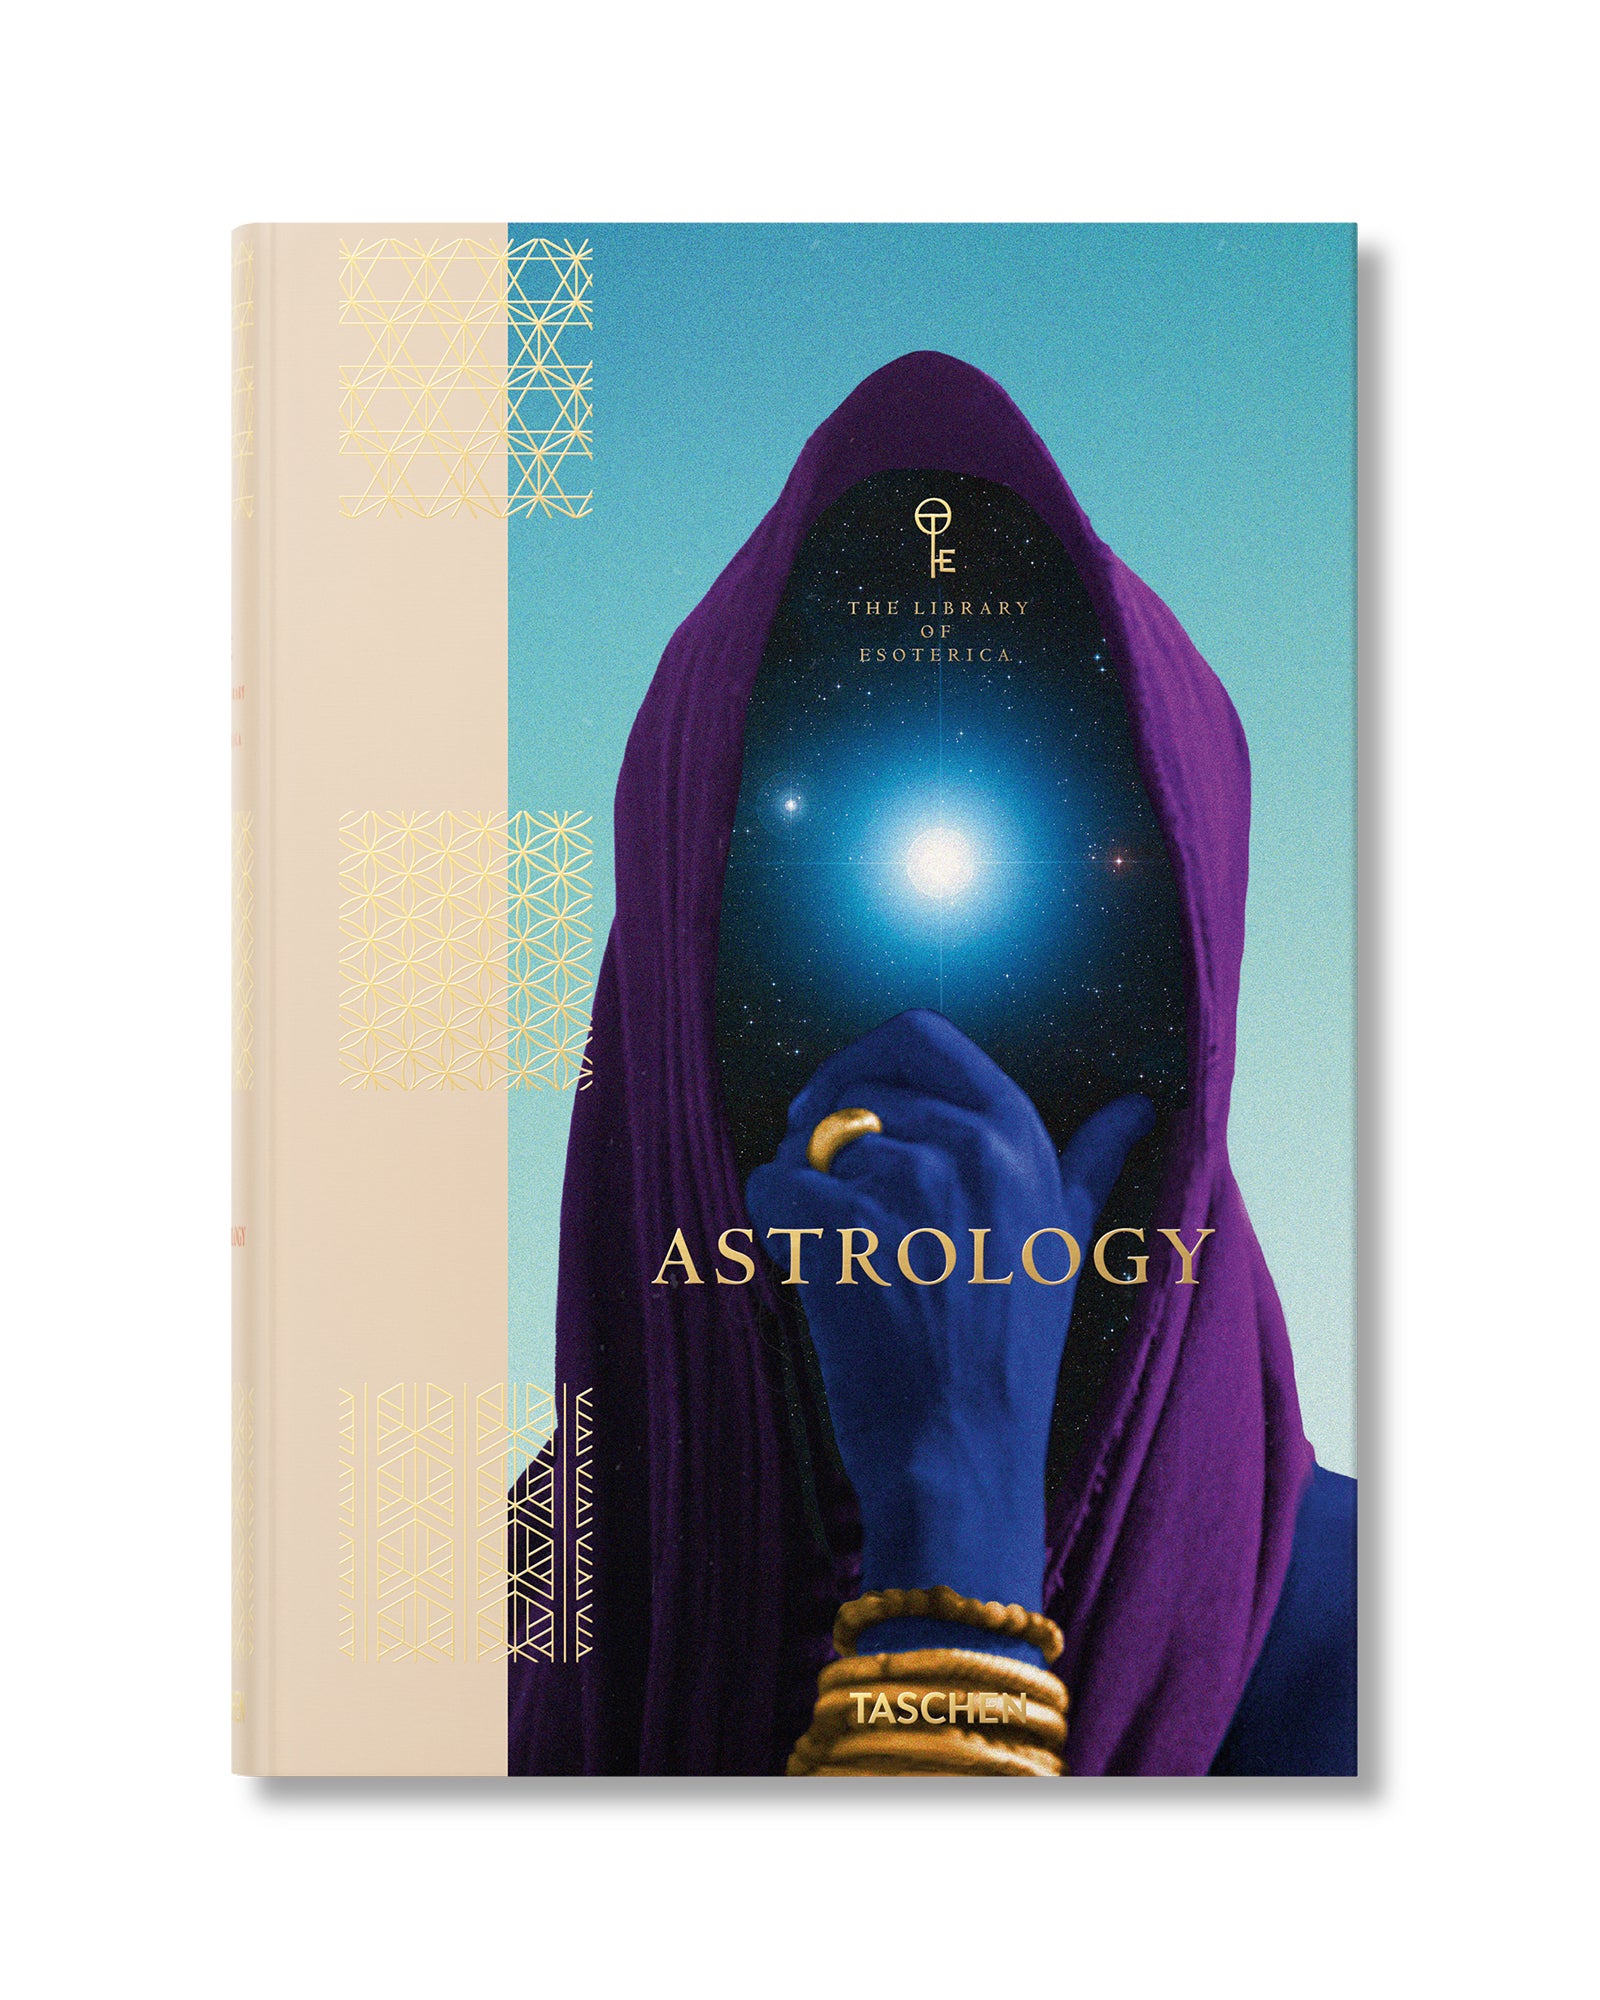 Astrology: The Library of Esoterica Book